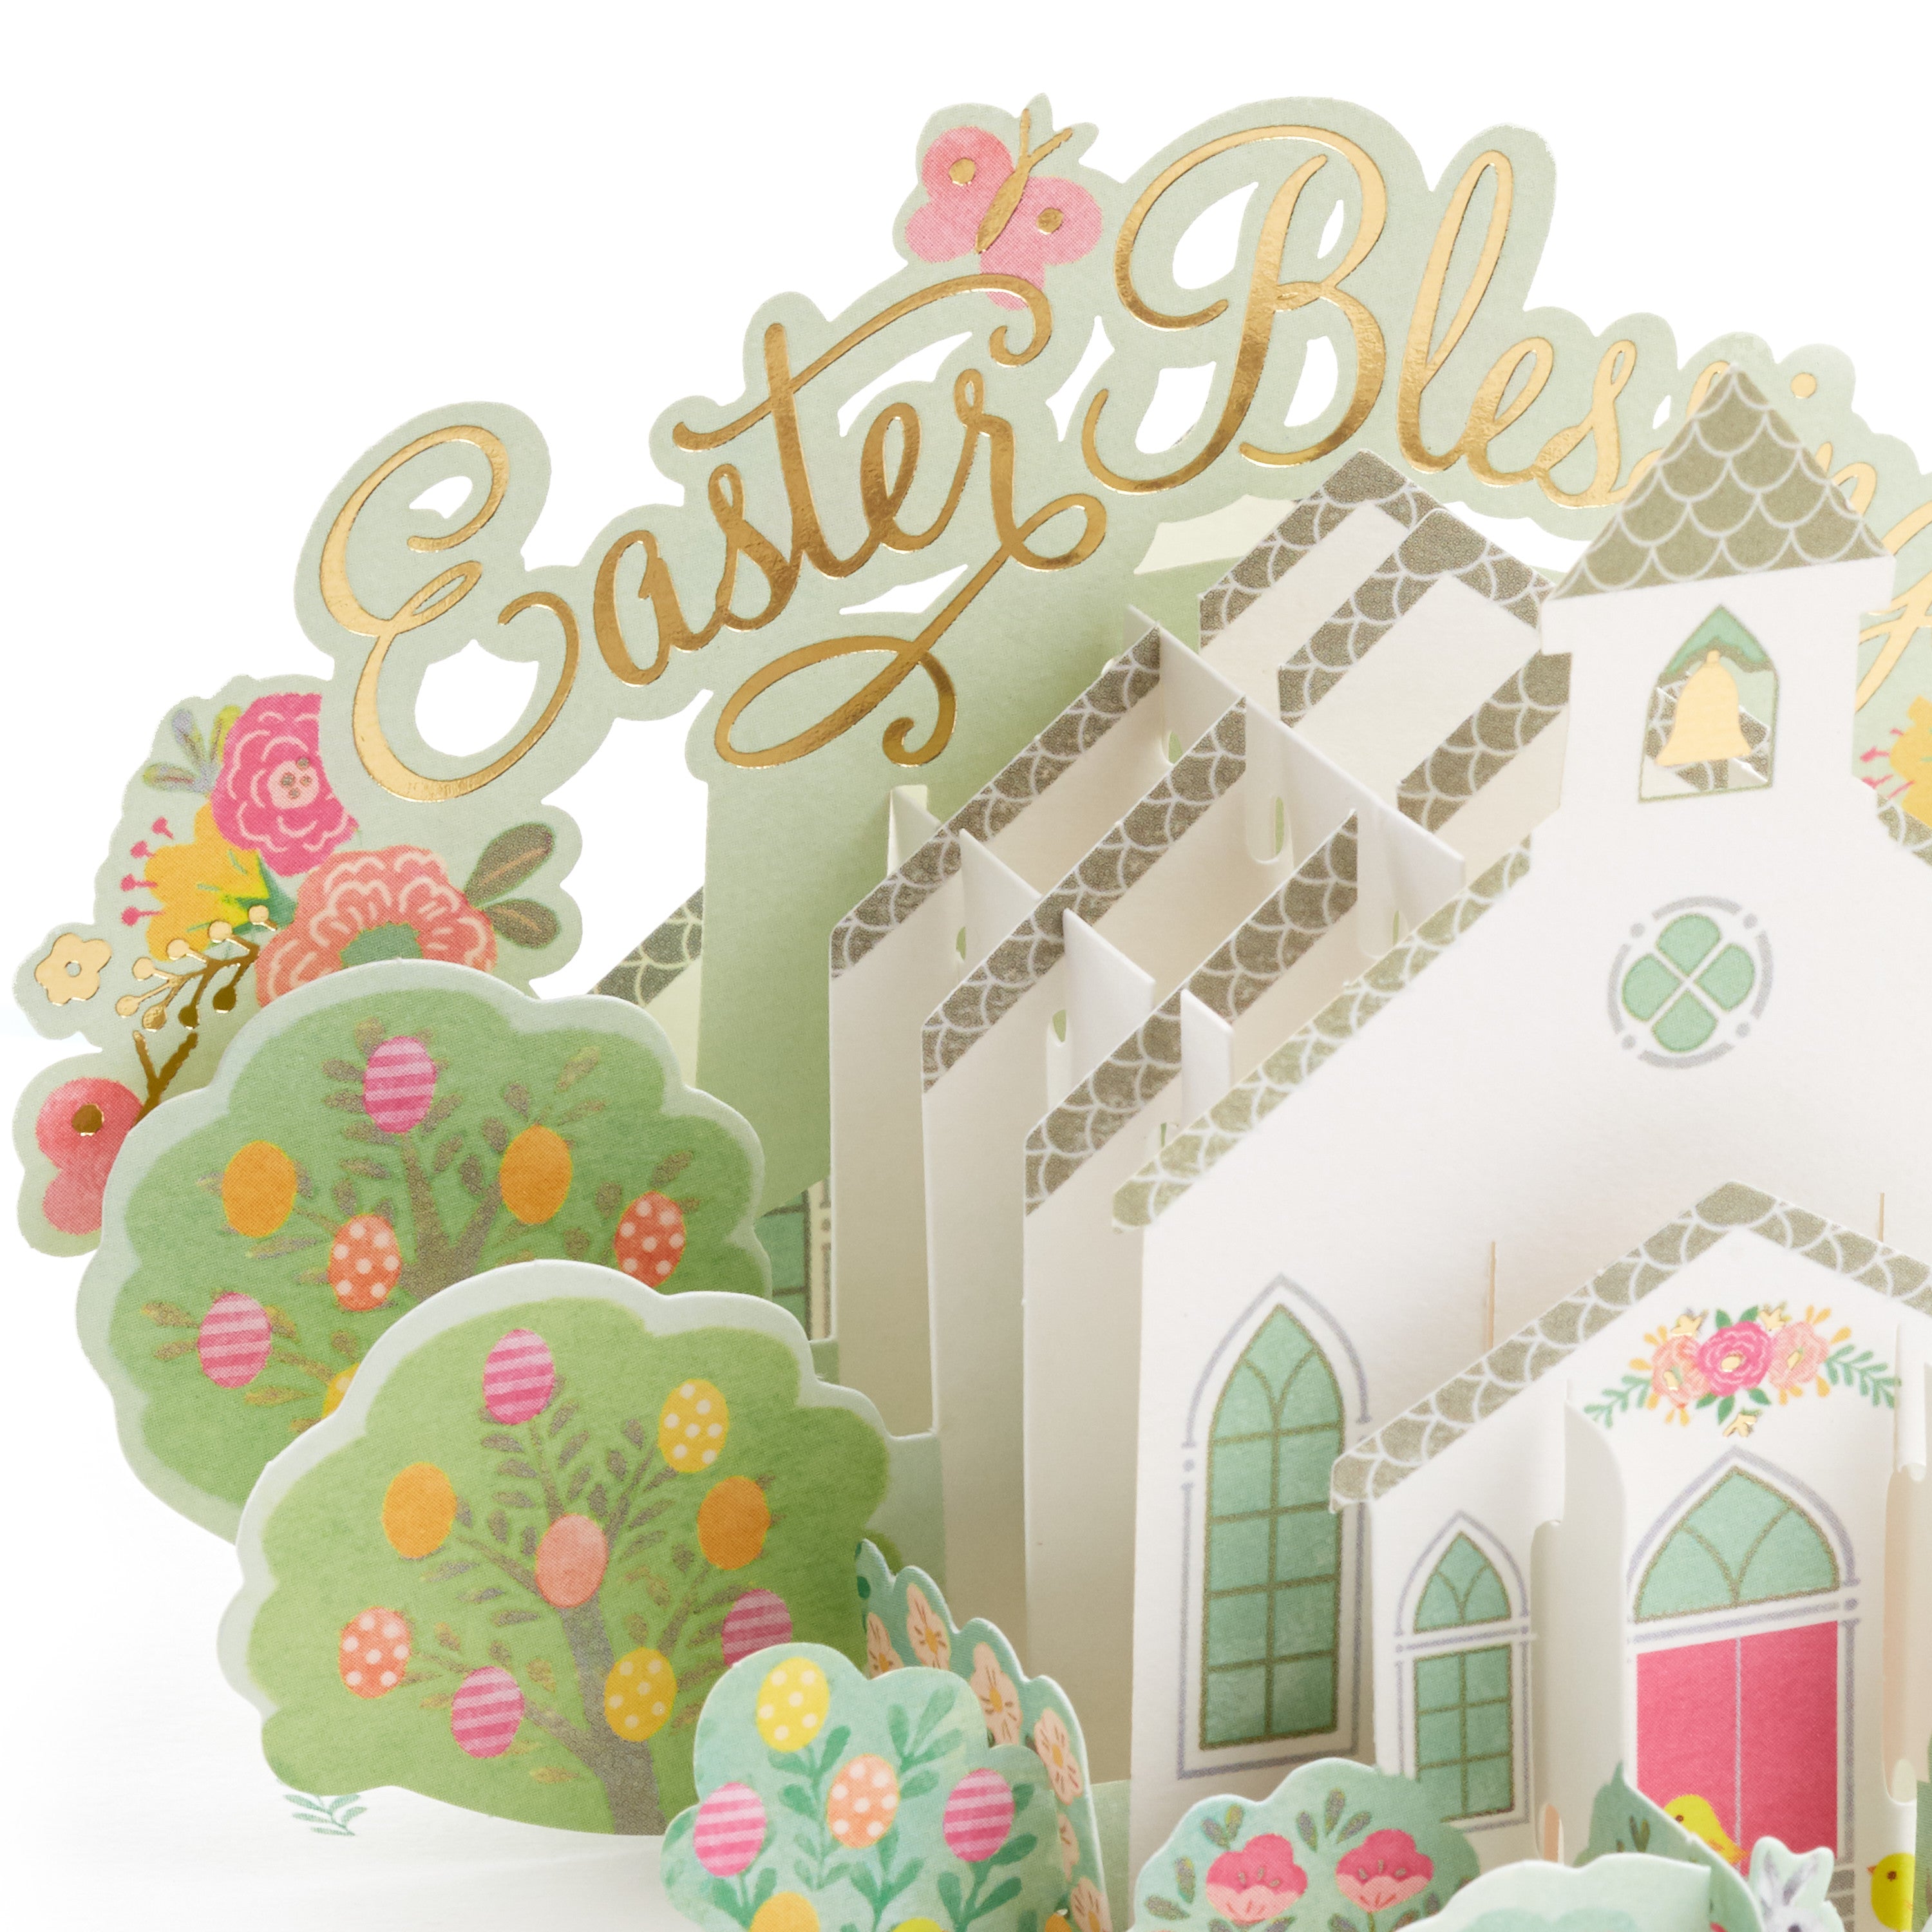 Signature Paper Wonder Religious Pop Up Easter Card (Easter Blessings)